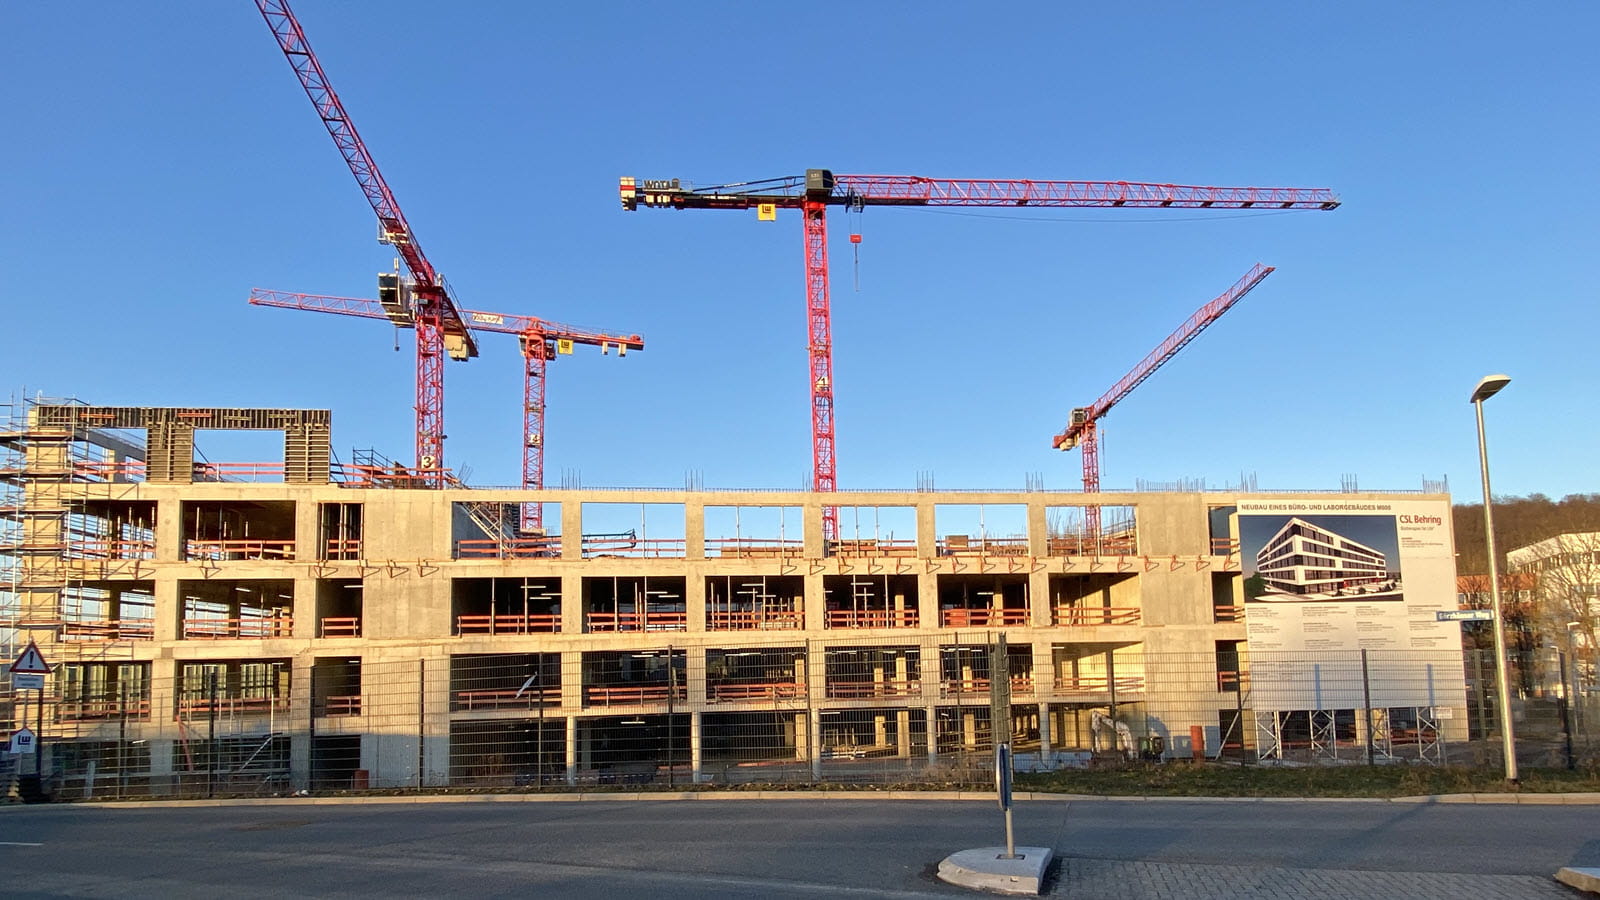 Several red construction cranes at work on upper floors of a new research building in Marburg, Germany